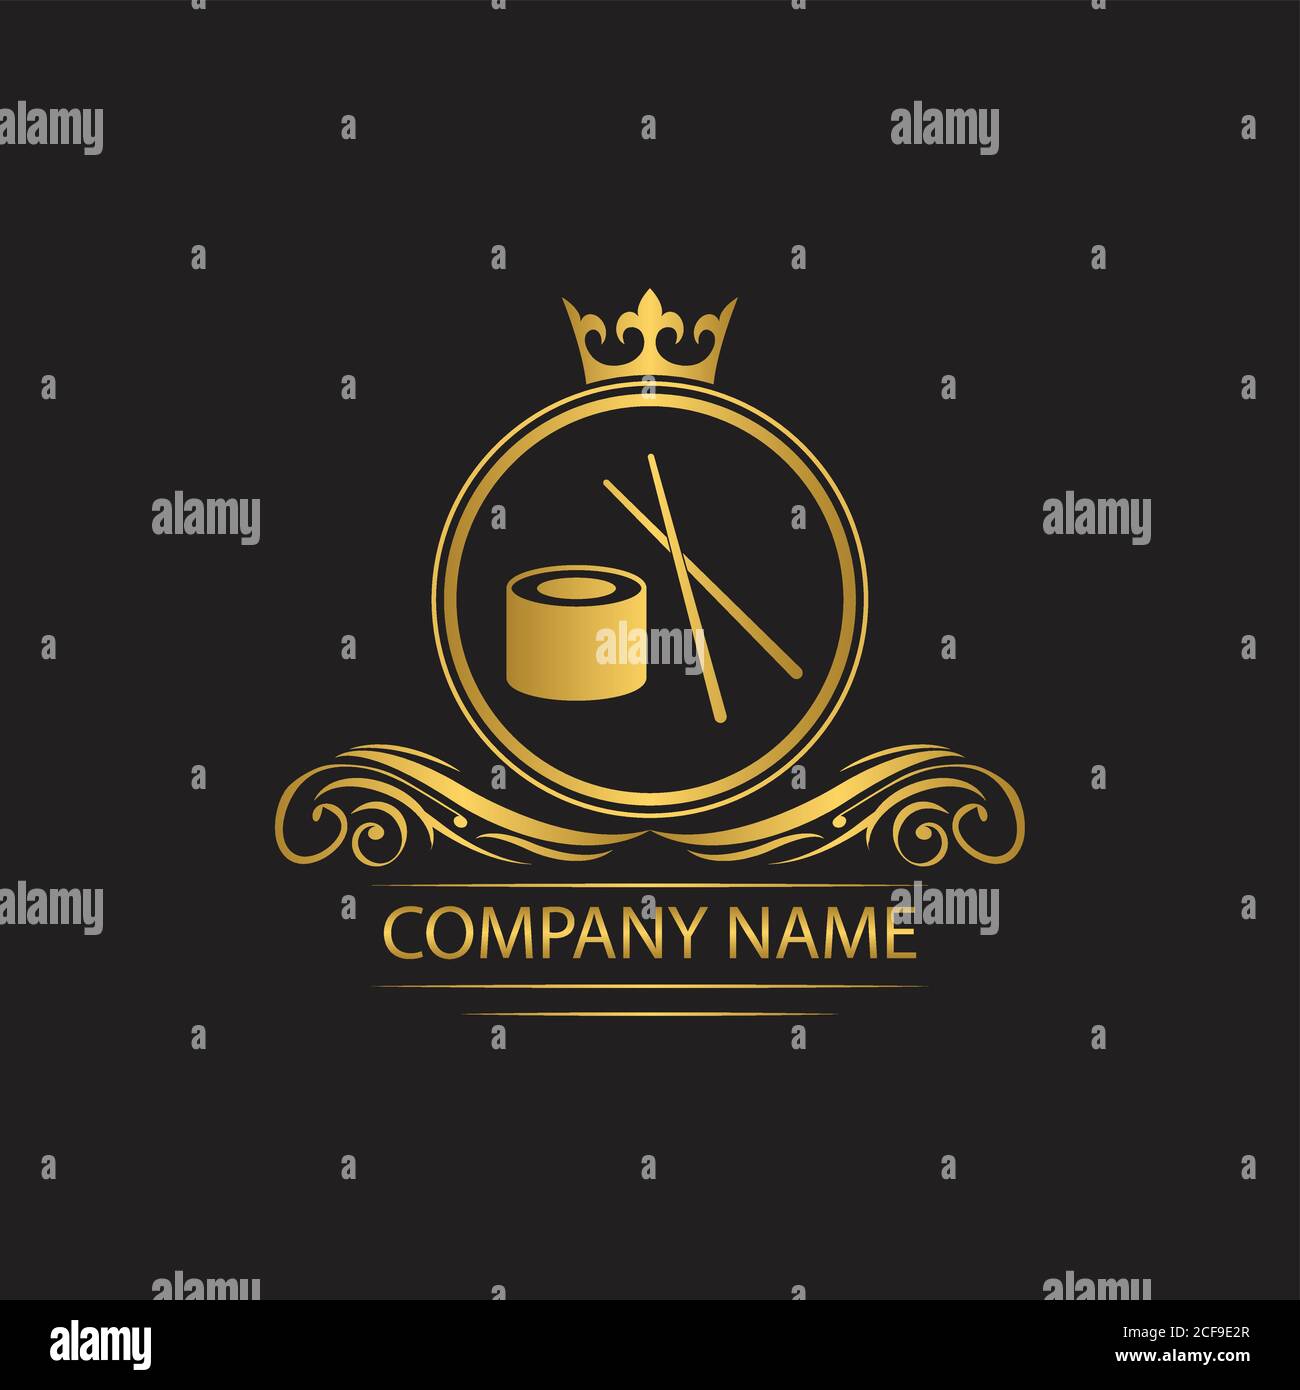 sushi logo template luxury royal restaurant vector company decorative emblem with crown Stock Vector